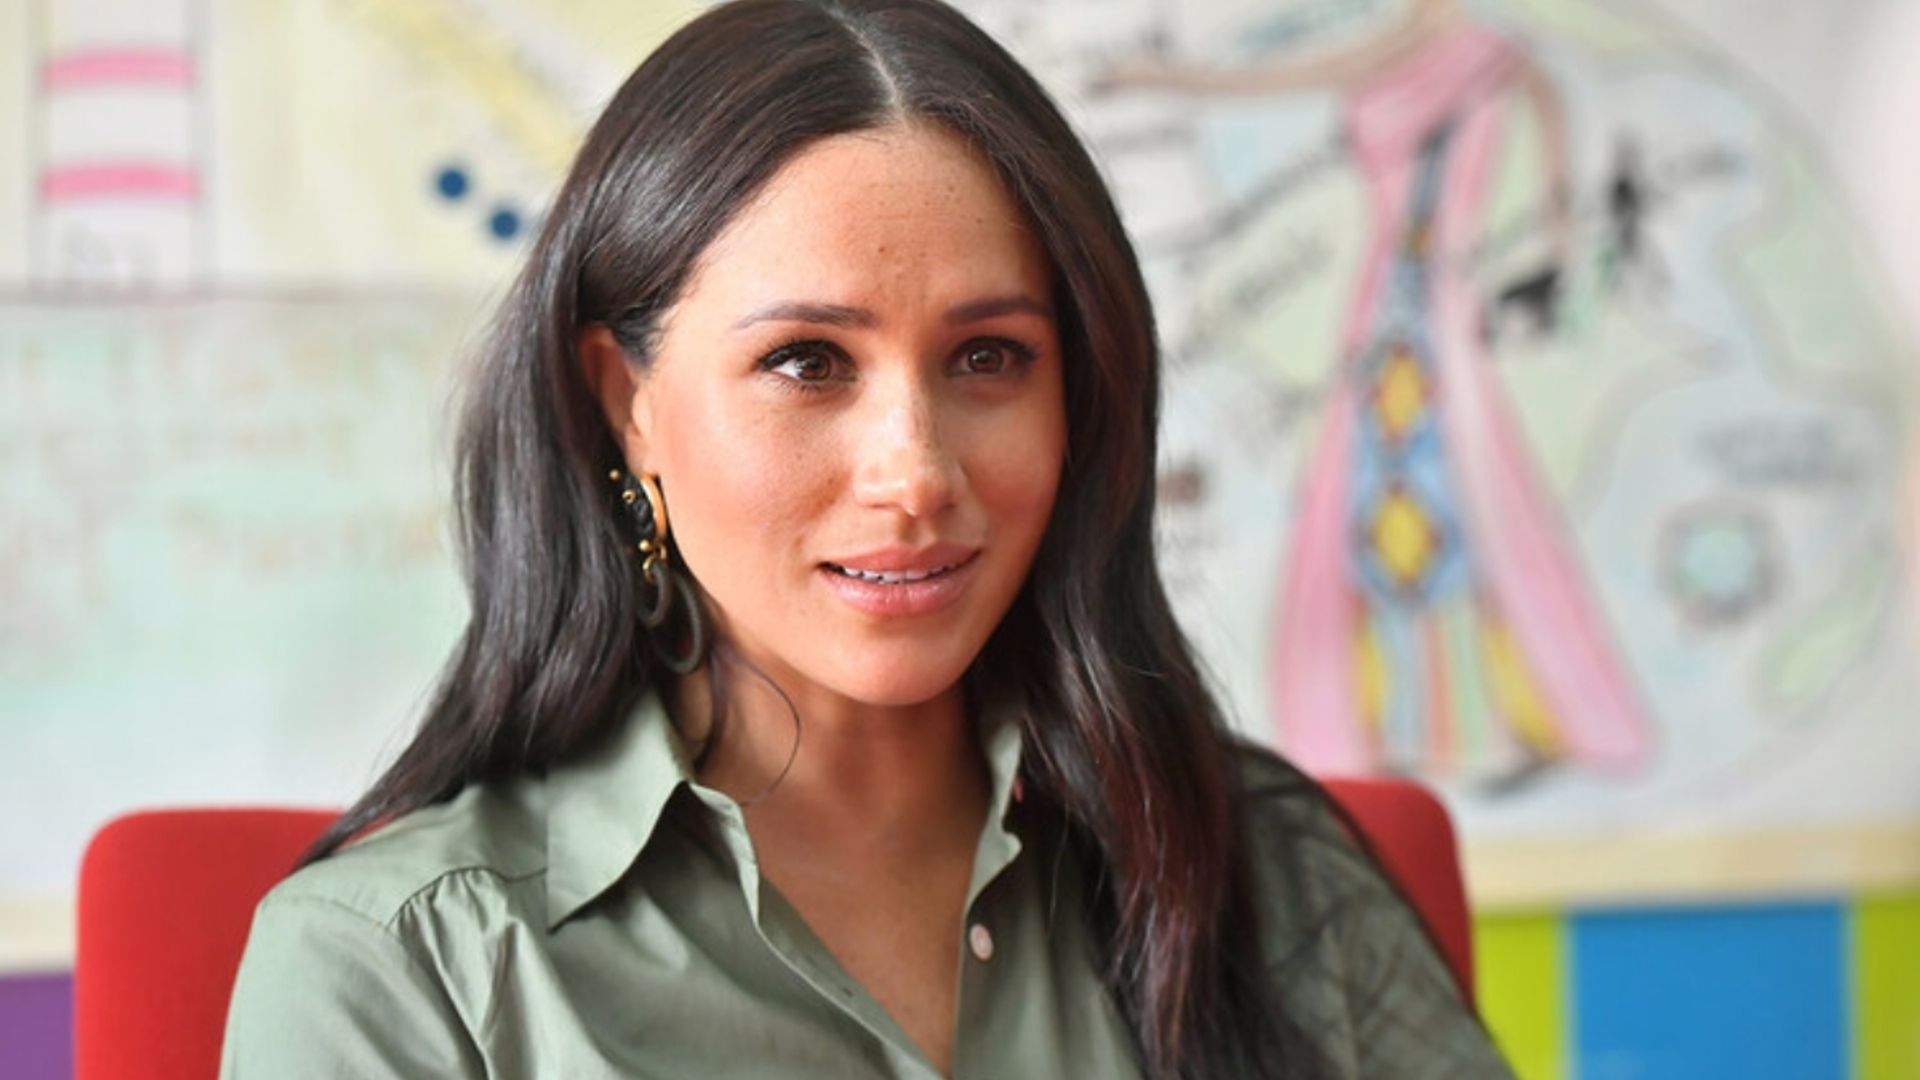 Meghan Markle reveals she was rejected for popular TV show